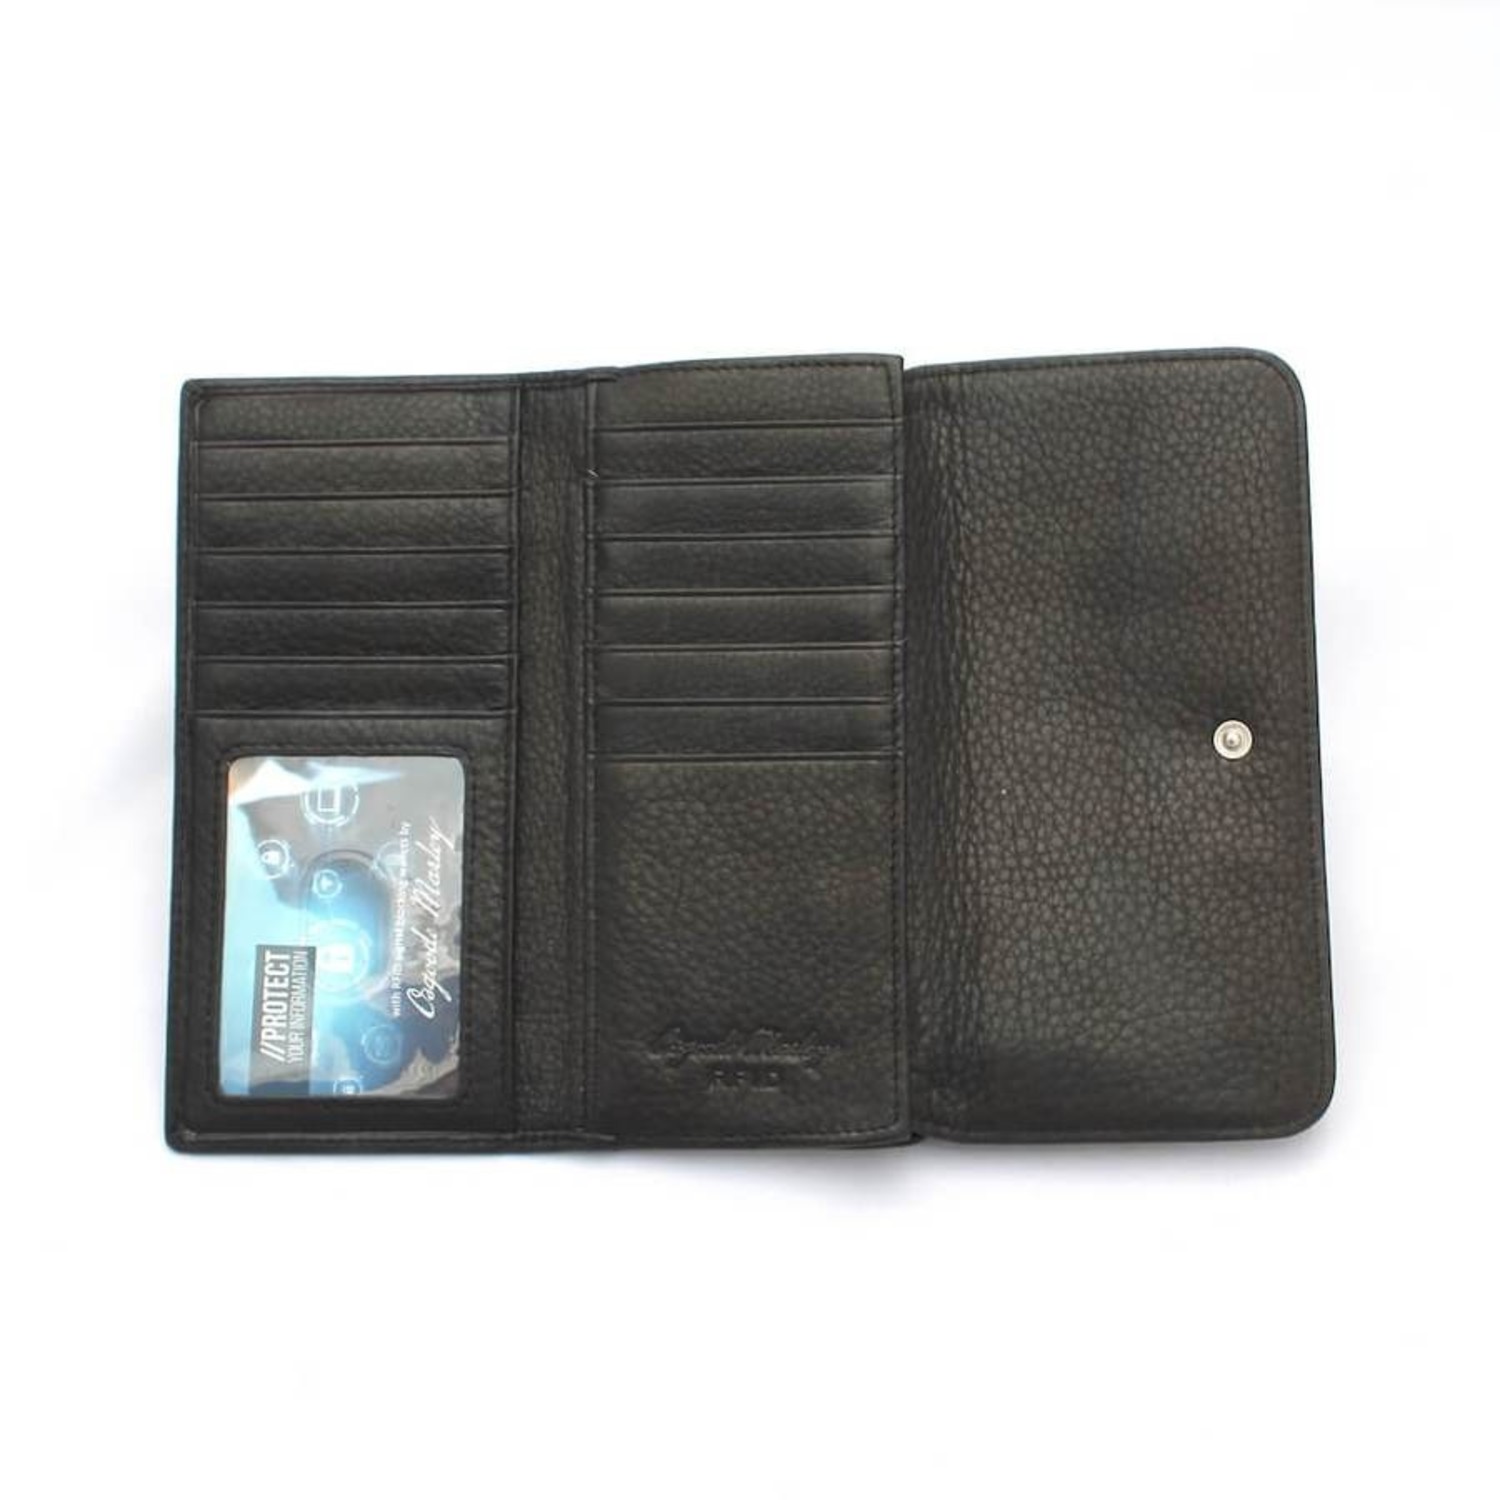 Osgoode Marley RFID Card Case Wallet - Just Bags Luggage Center